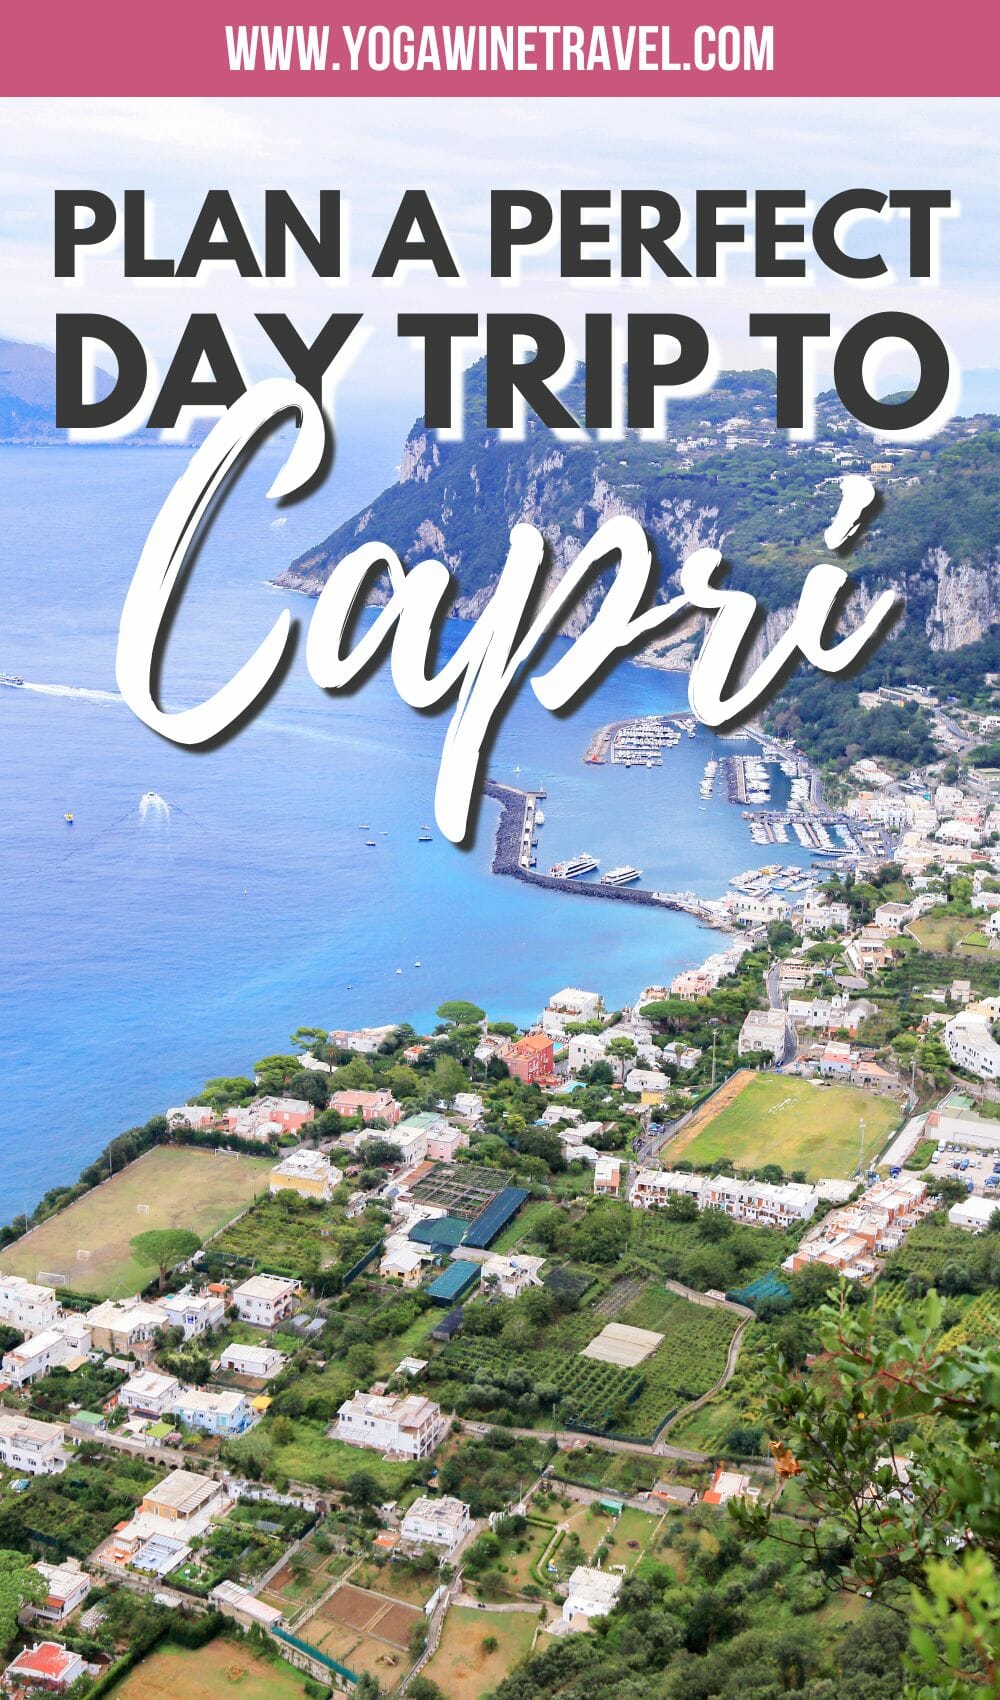 View of Capri in Italy with text overlay